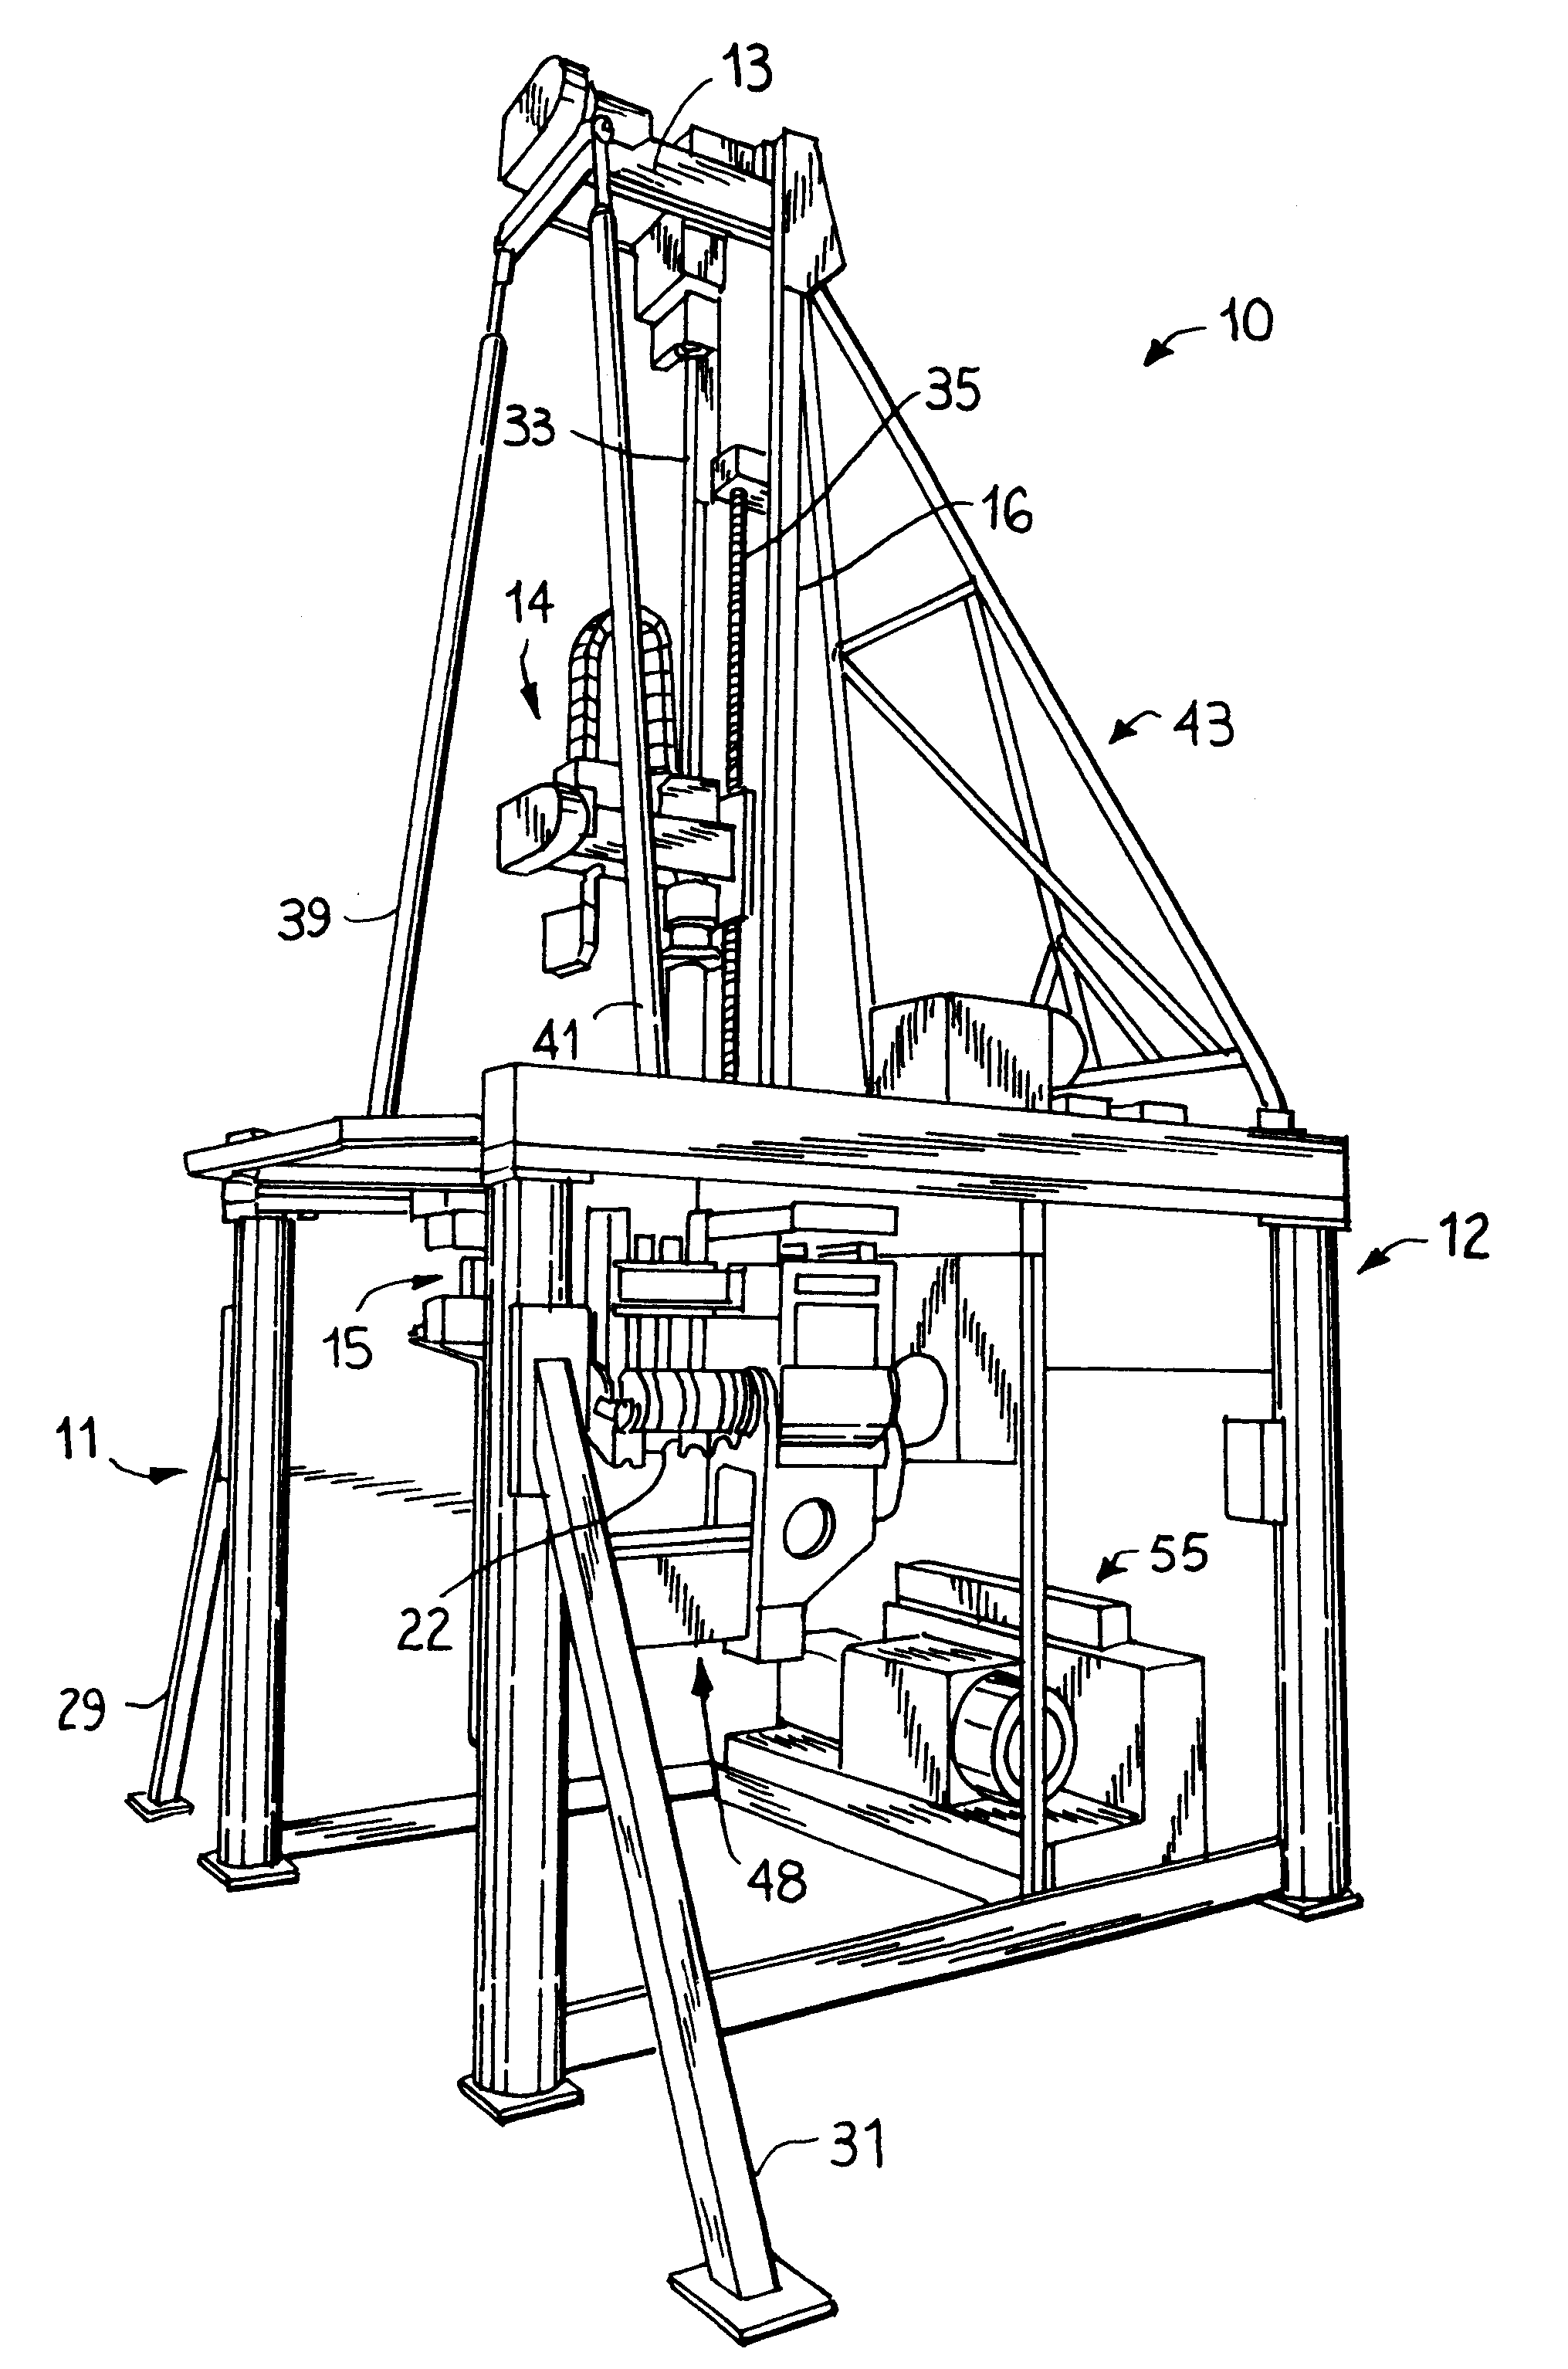 Vertically oriented apparatus for bending tubing, and method of using same